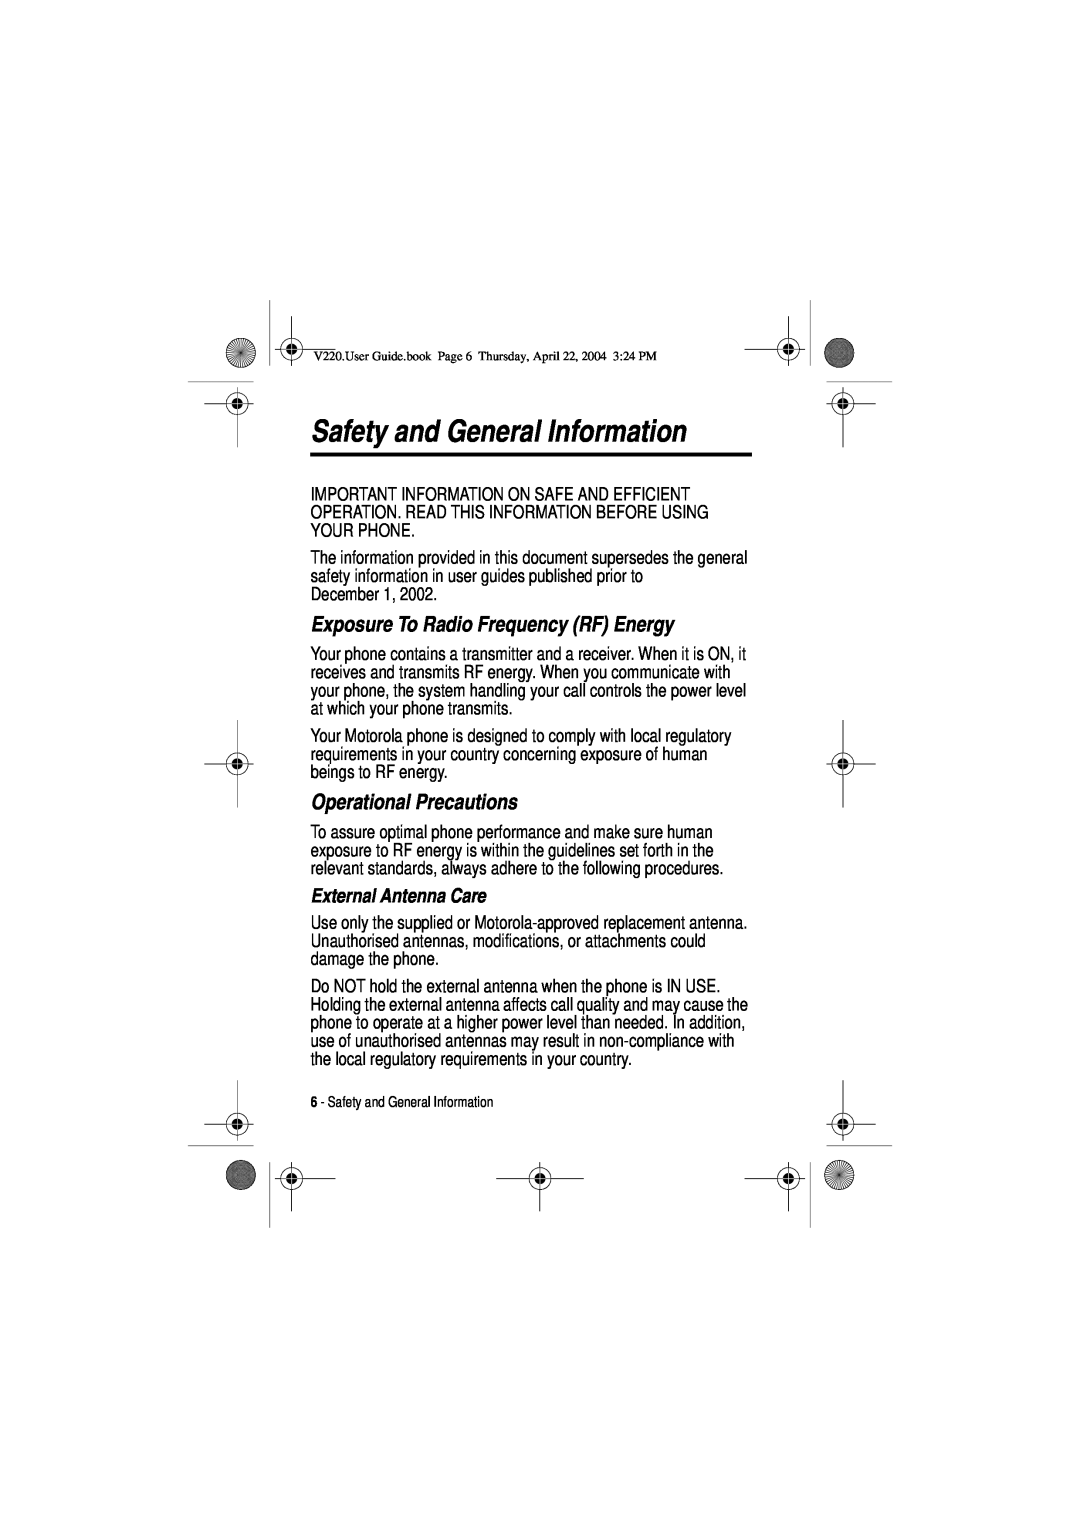 Motorola V220 manual Safety and General Information, Exposure To Radio Frequency RF Energy, Operational Precautions 